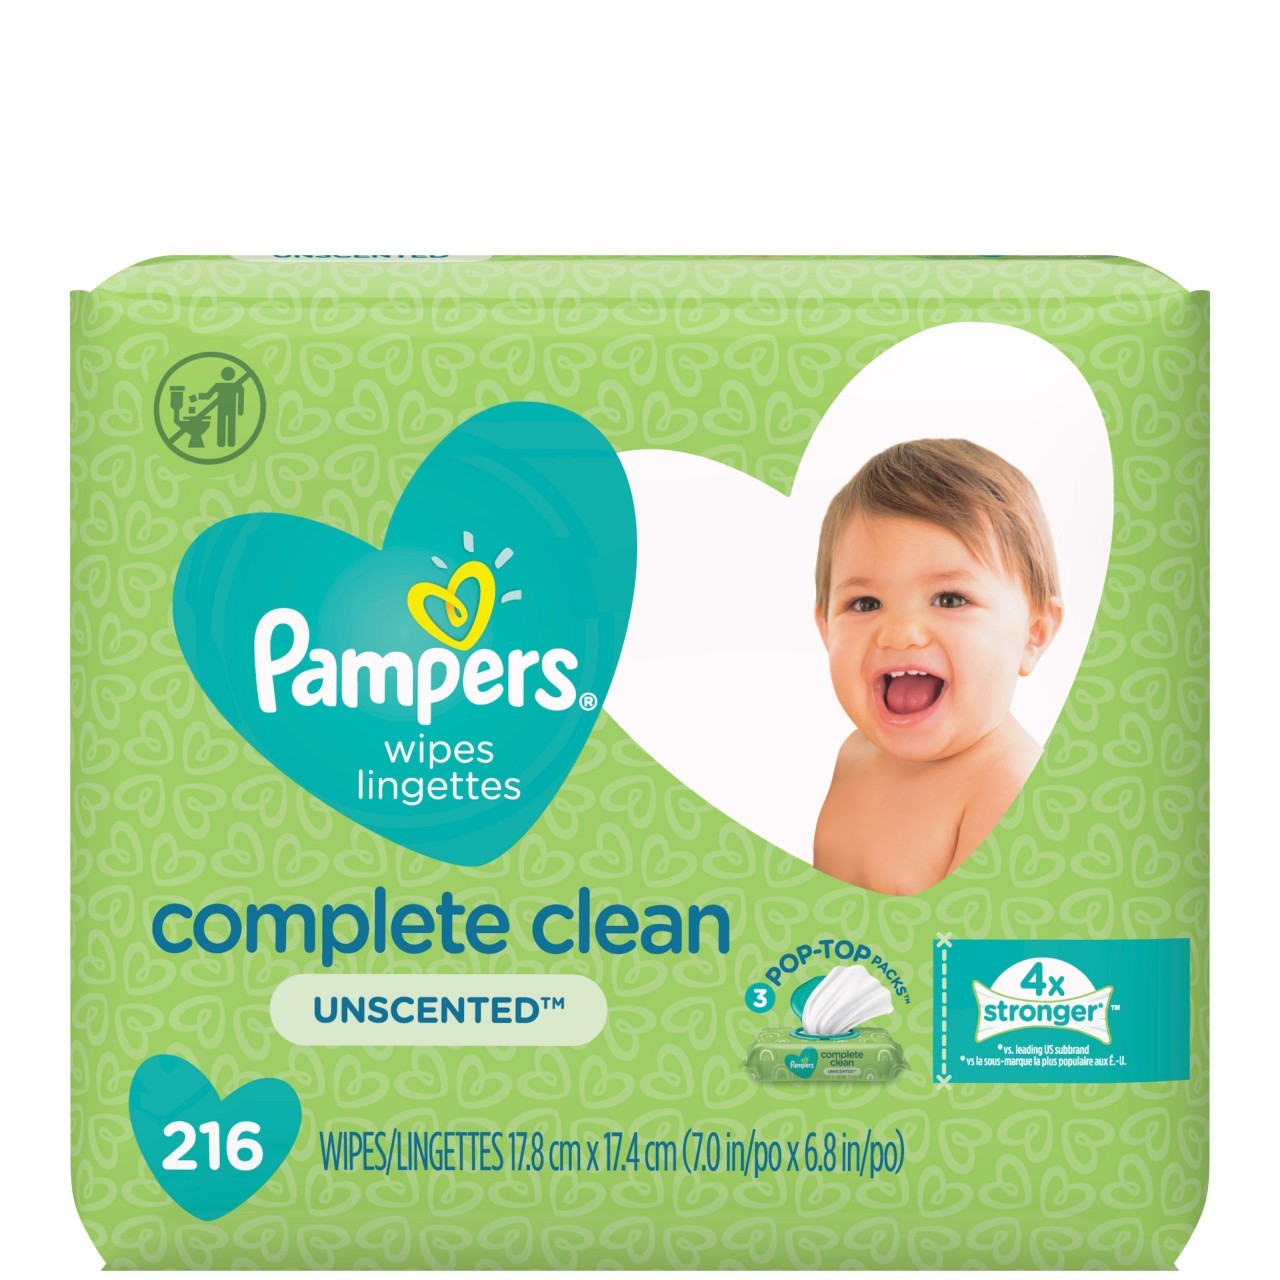 PAMPERS WIPES COMPLETE UNSCENTED 216s